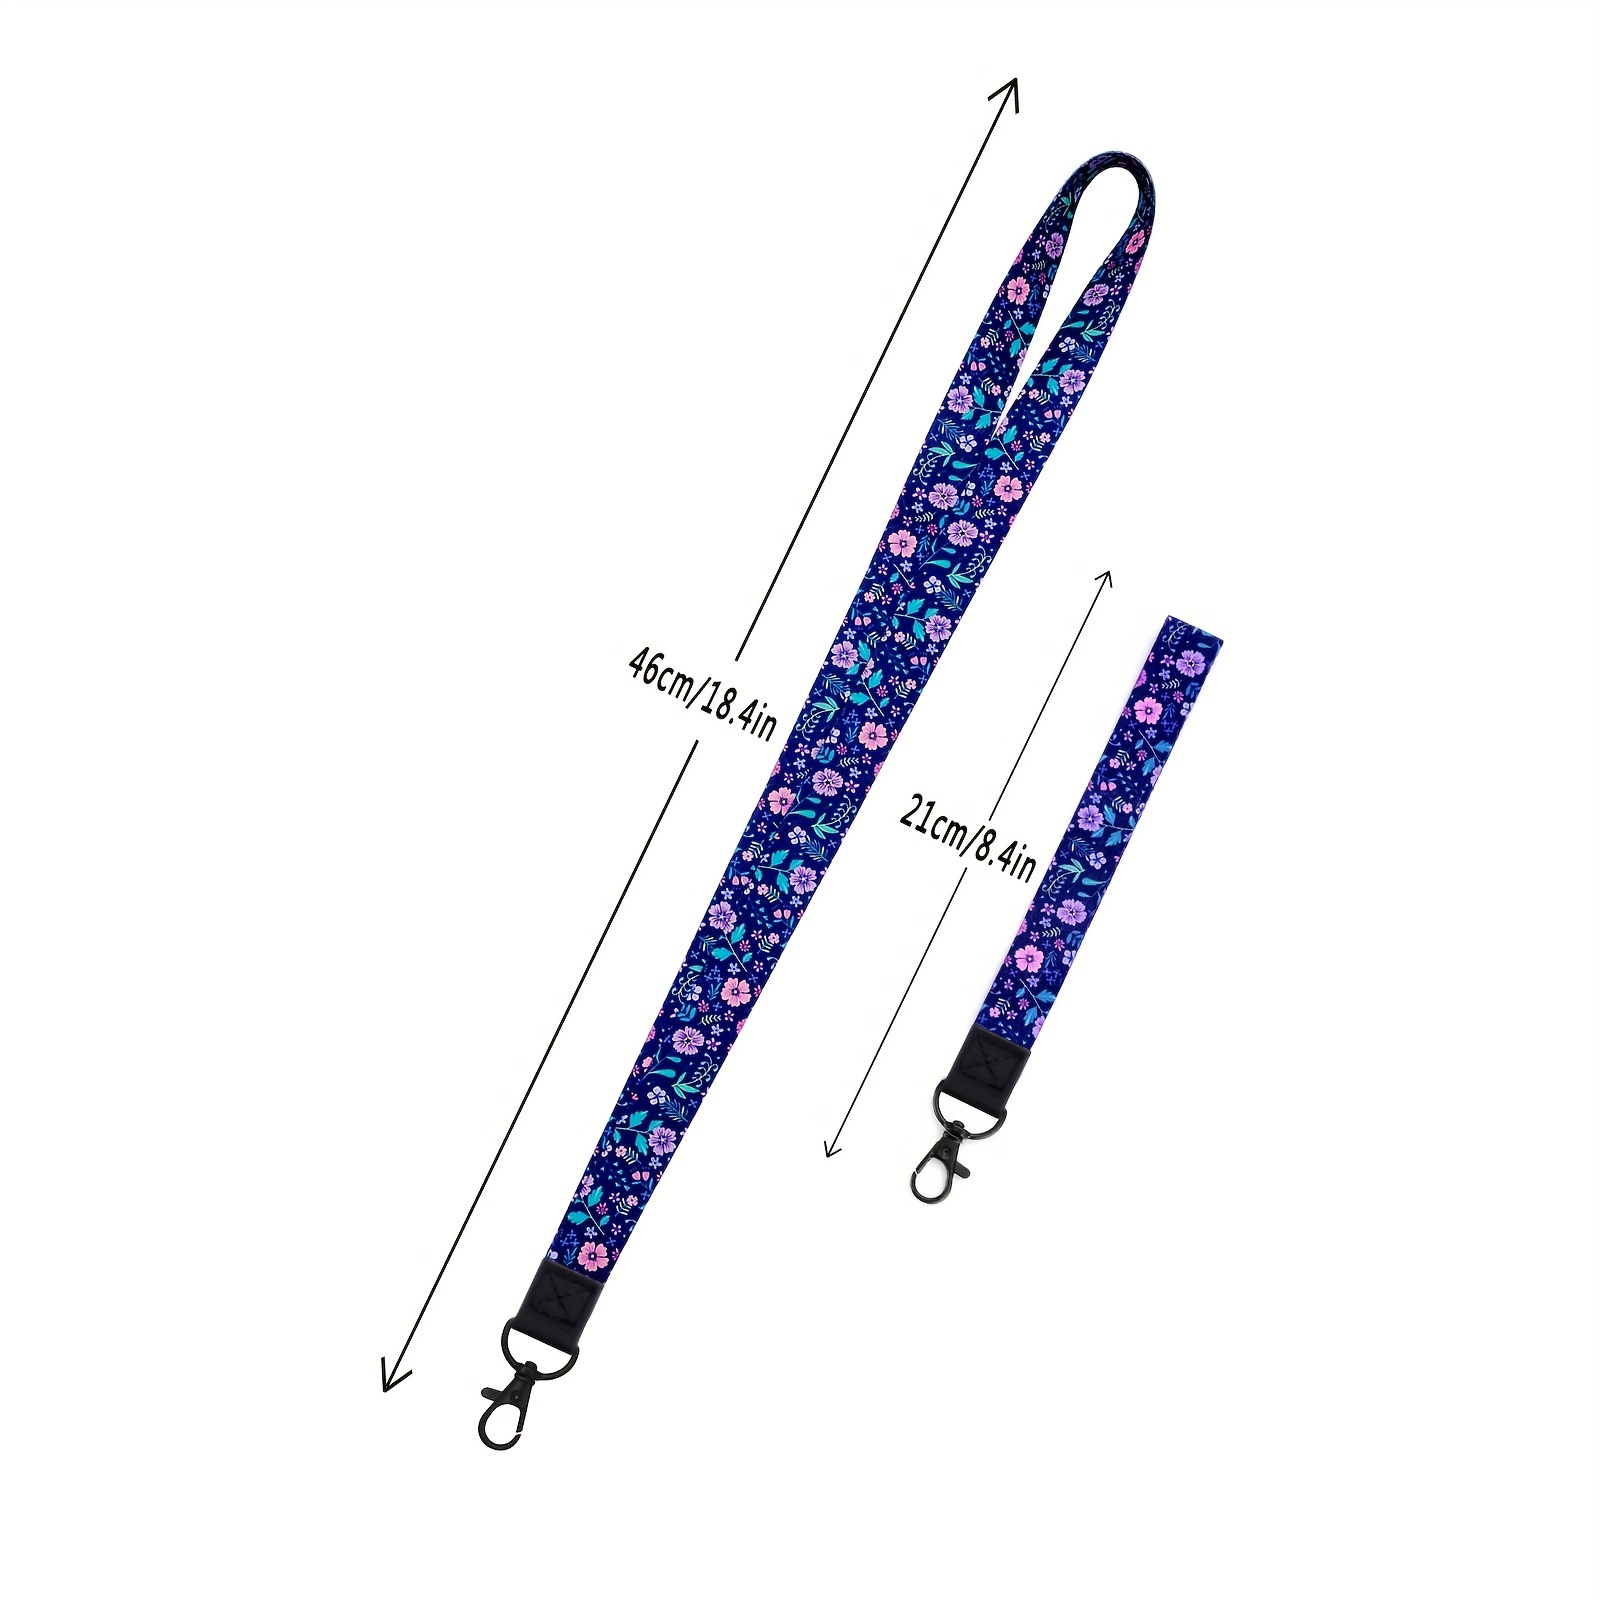 2pcs Cute Lanyard Pack,Consist of 1Pcs Neck Lanyards for ID Badges for Women Cute -1PCS Wrist Lanyard for Keys/Phone/Wallet,Keychain Wristlet